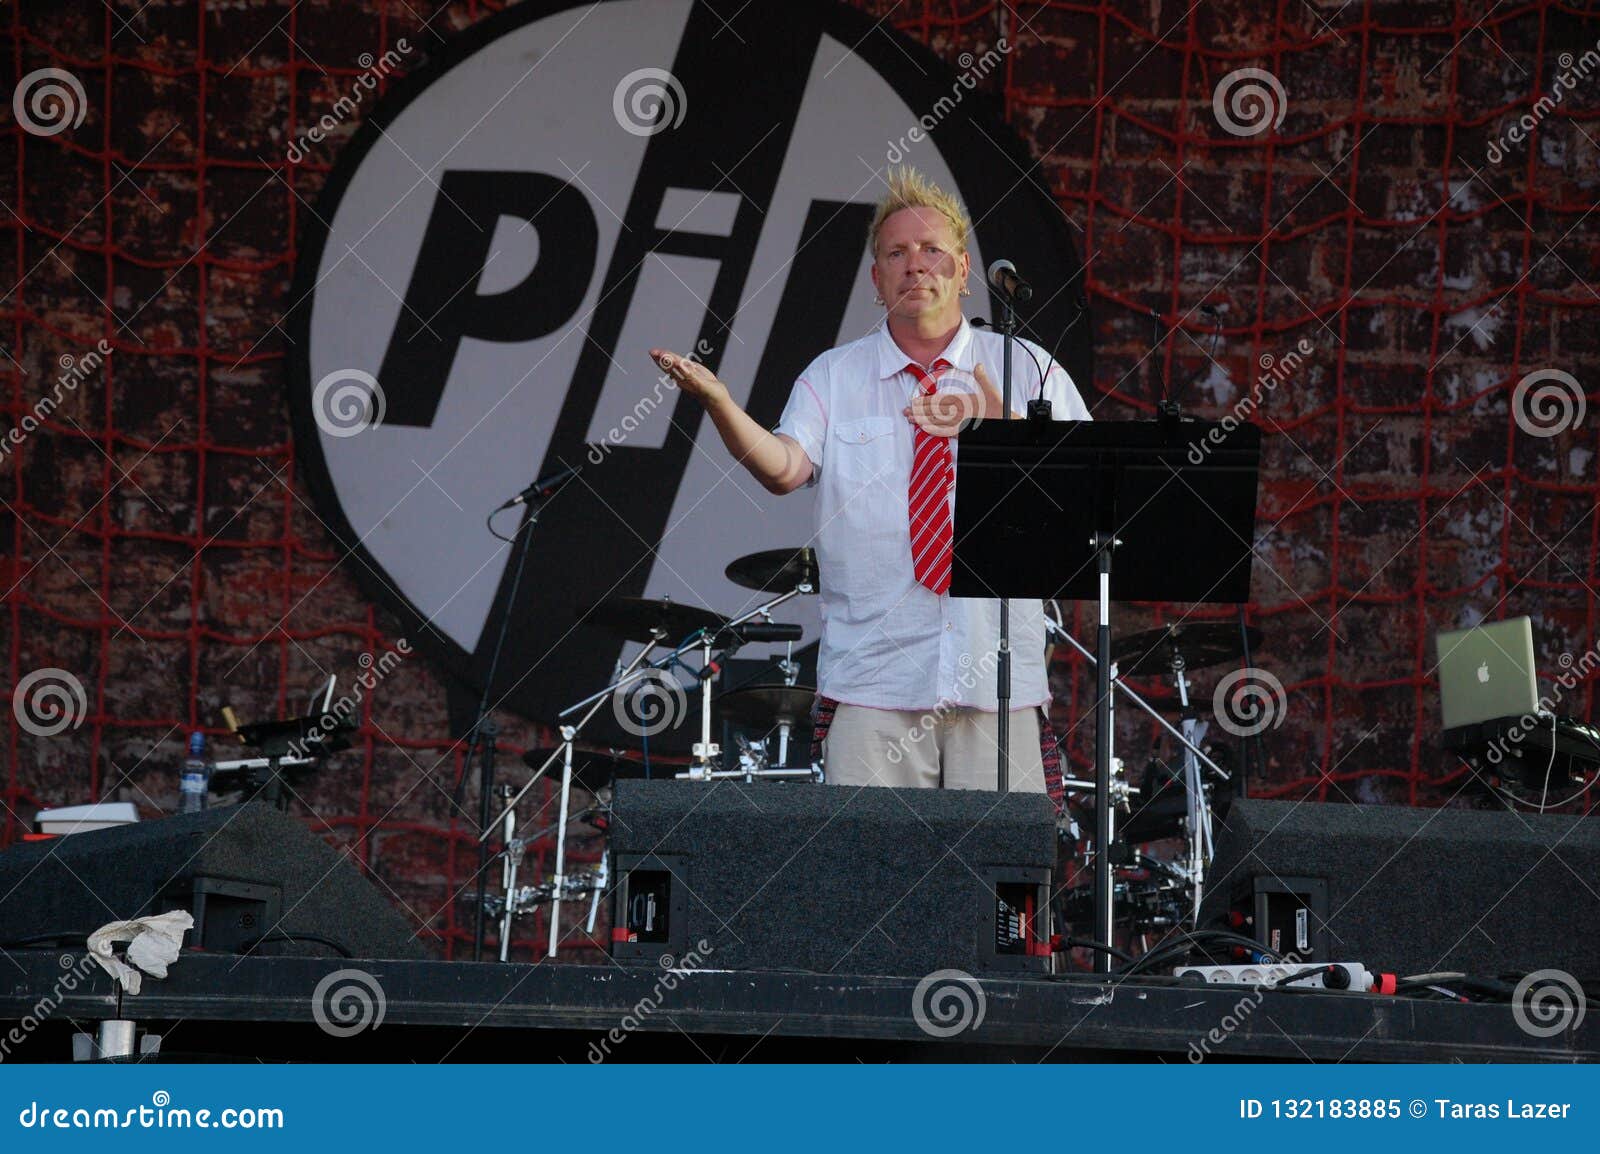 Trencin Slovakia July 9 11 Johnny Rotten Performing Live With Public Image Limited Pil Ex Sex Pistols At Pohoda Festival Editorial Image Image Of Anarchy People